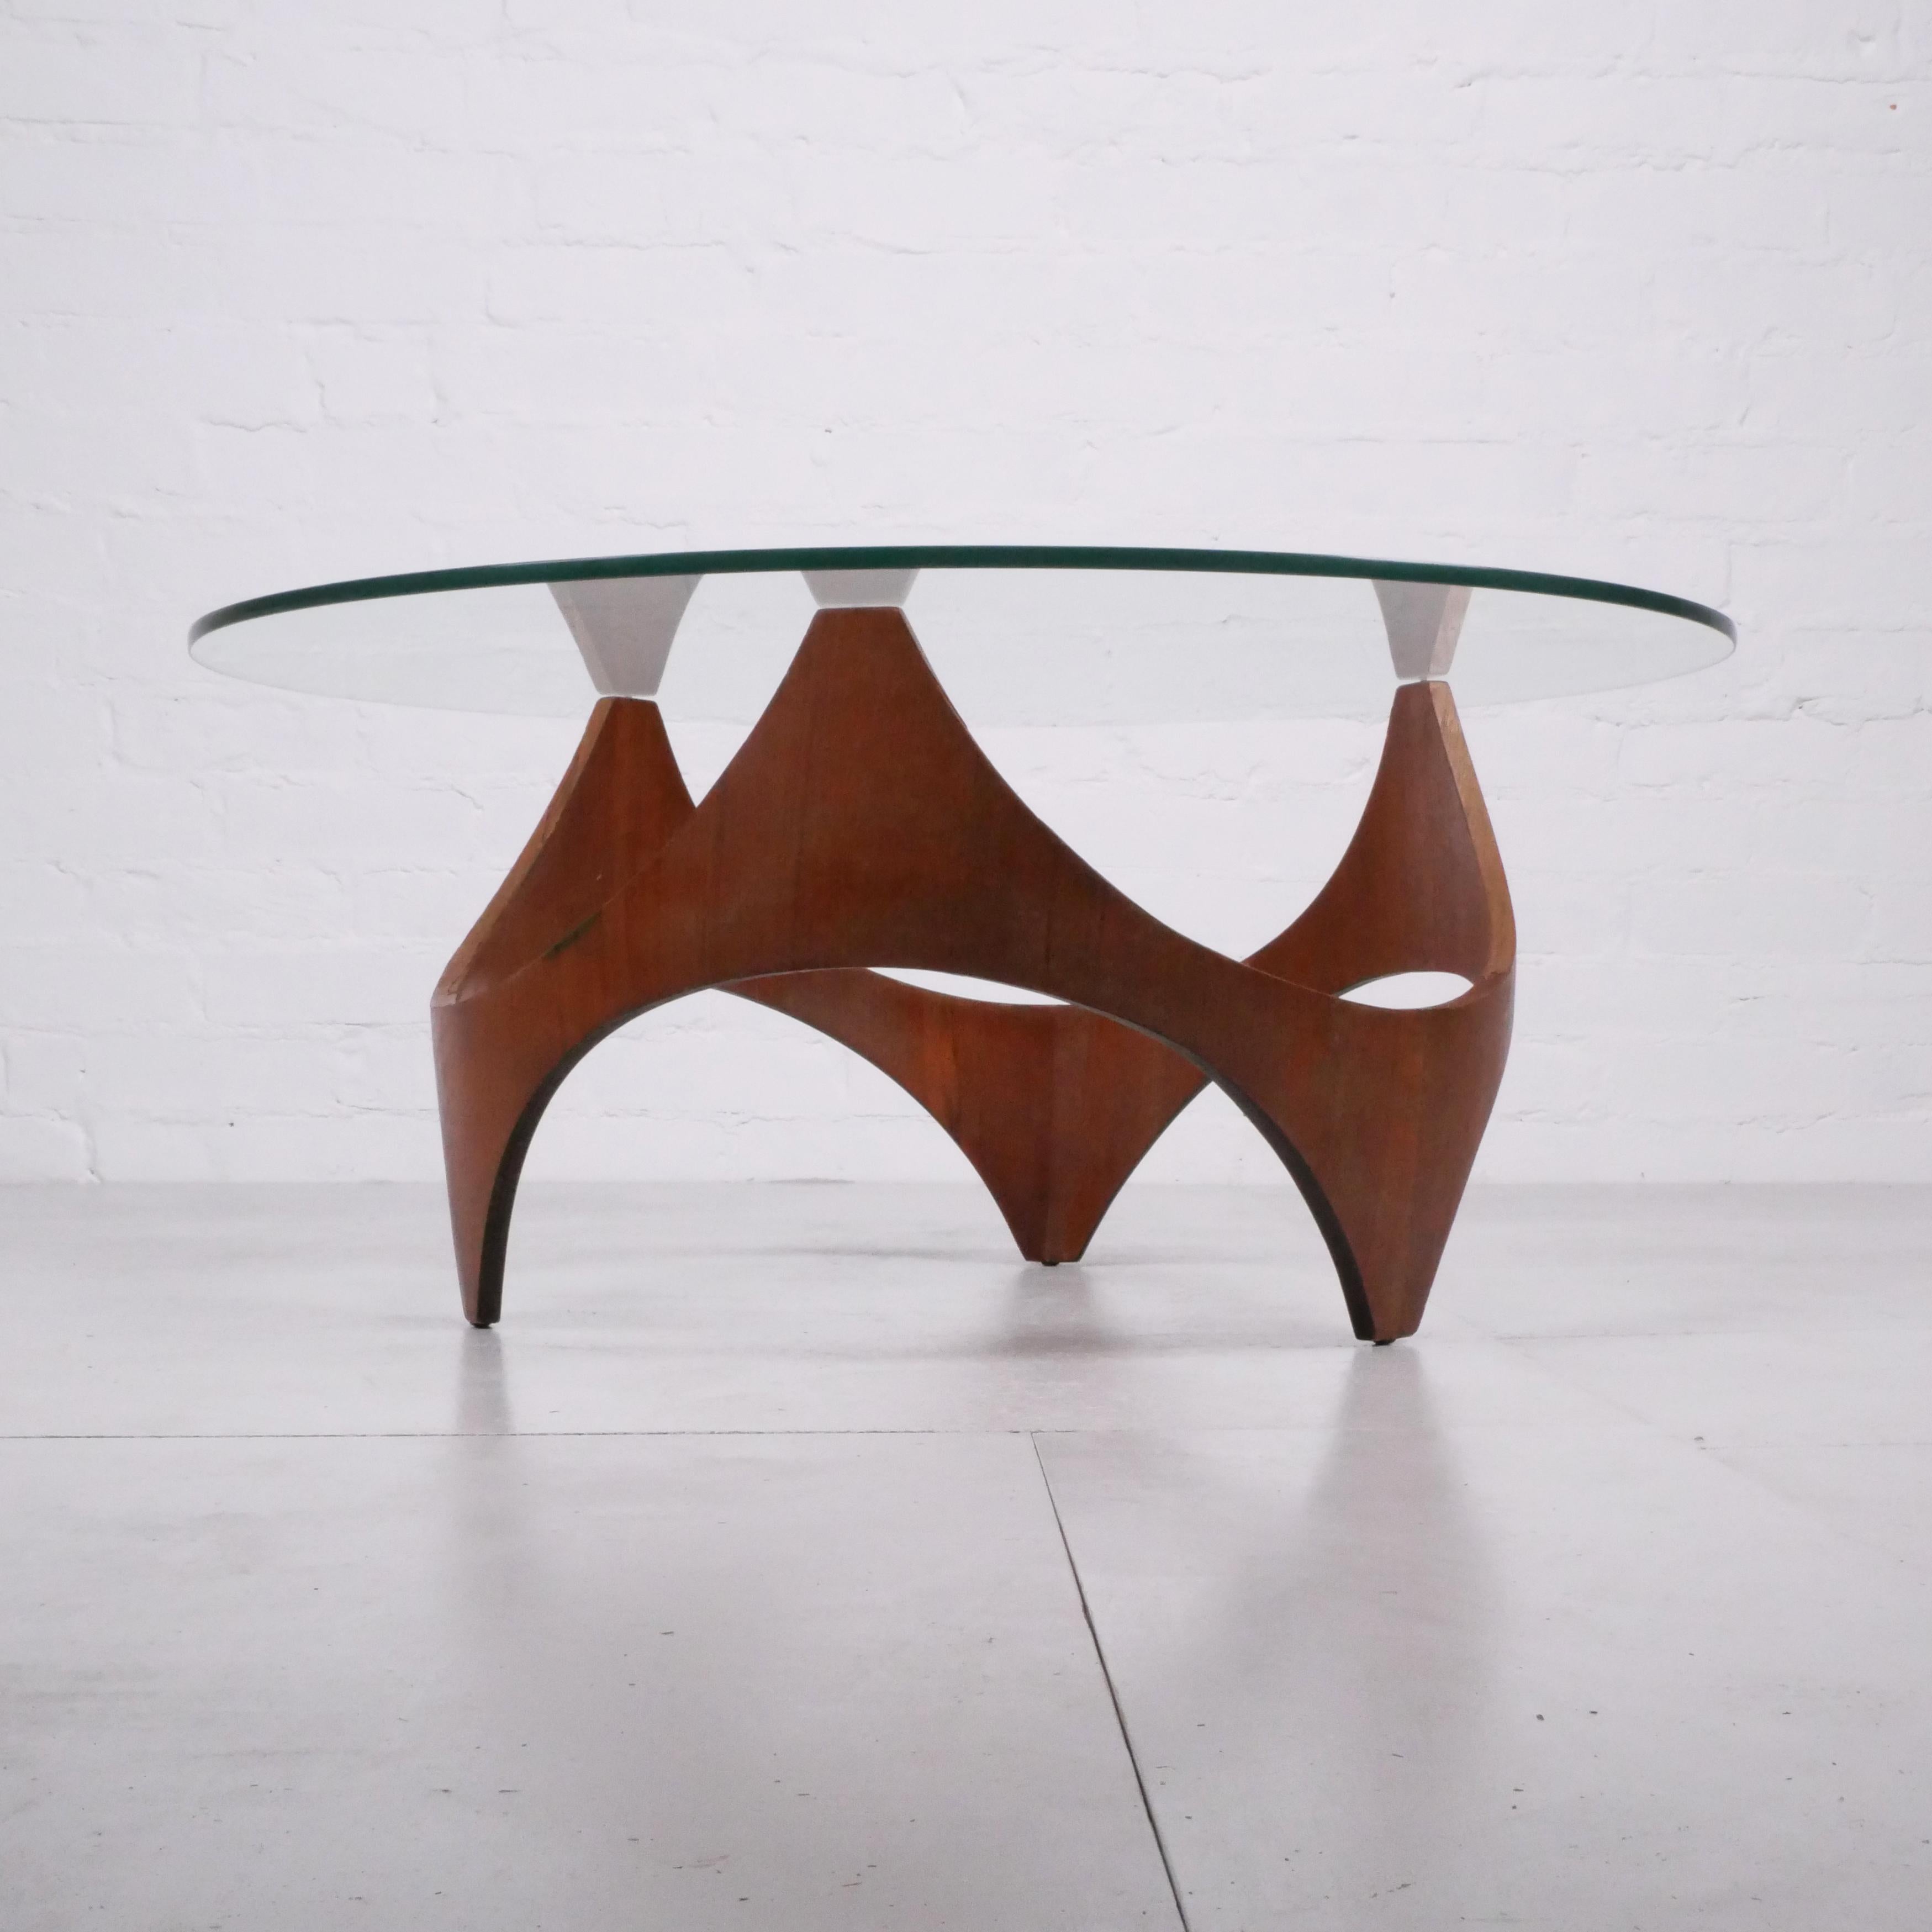 British Glass & Plywood Coffee Table, Style of Henry P Glass, Joe Colombo Gerald Summers